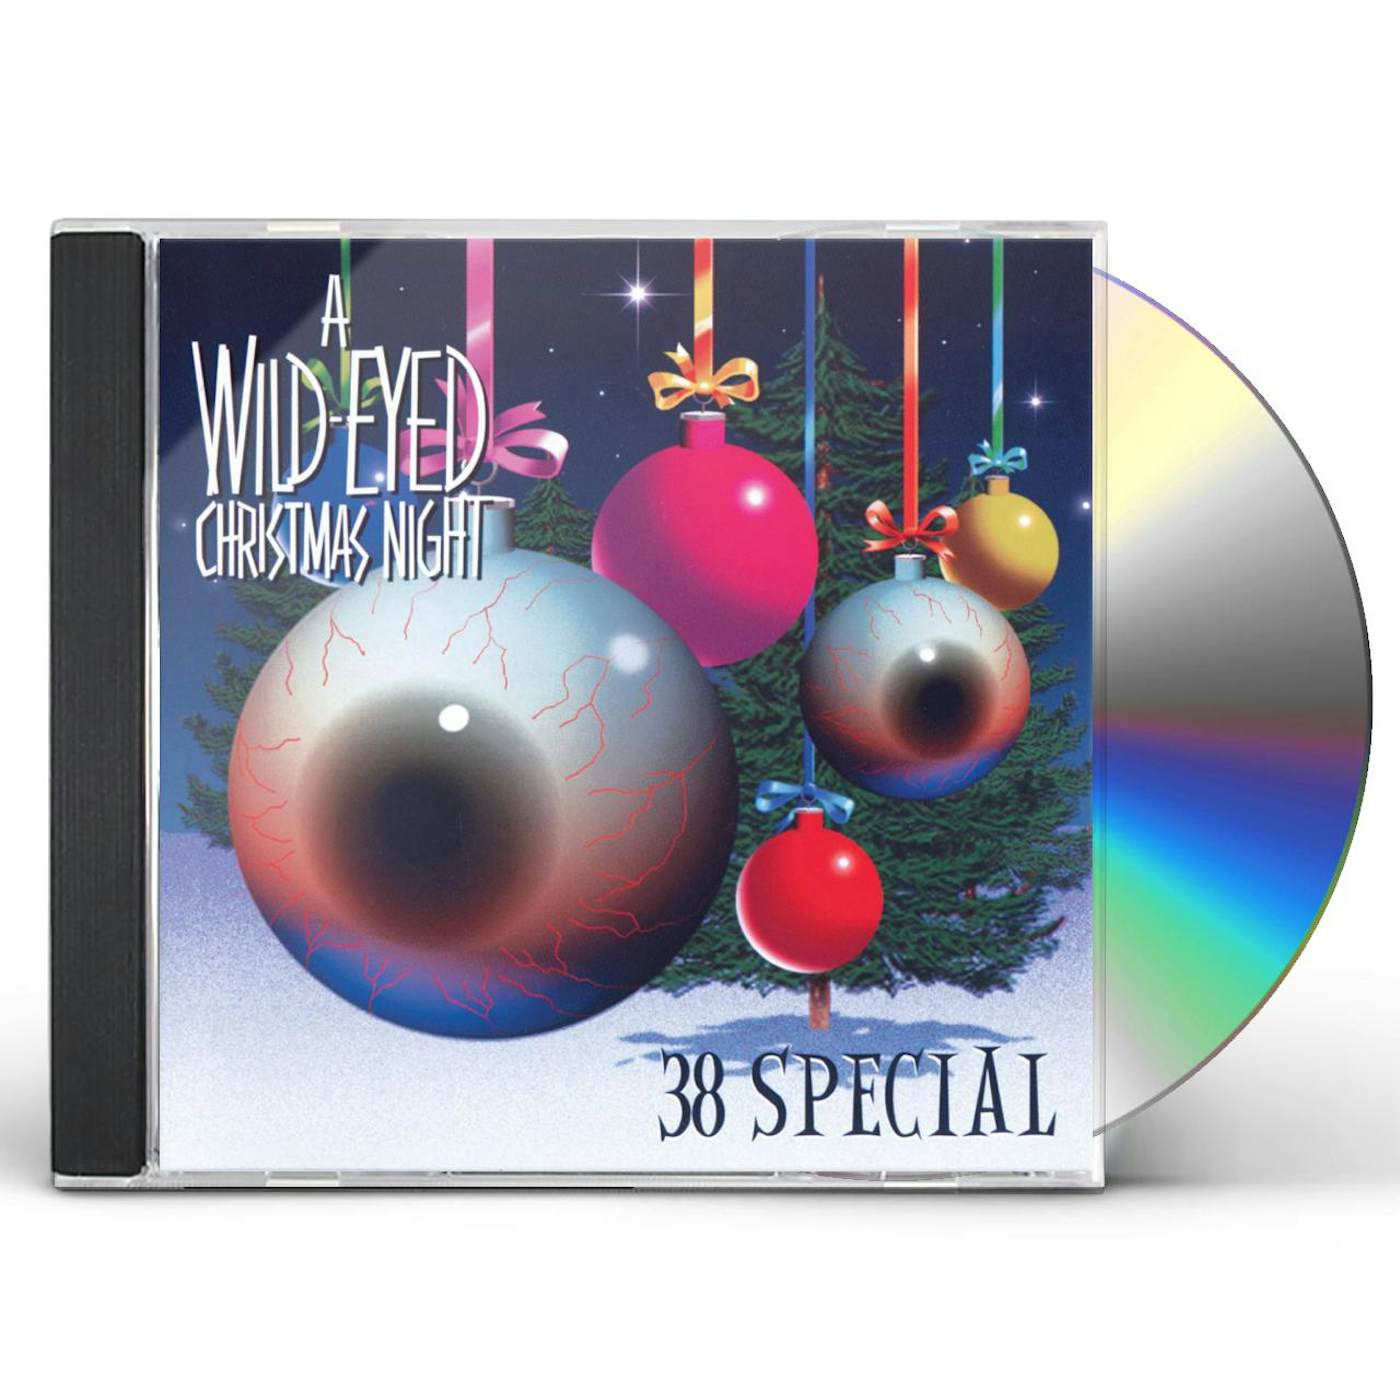 38 Special WILD-EYED CHRISTMAS NIGHT CD